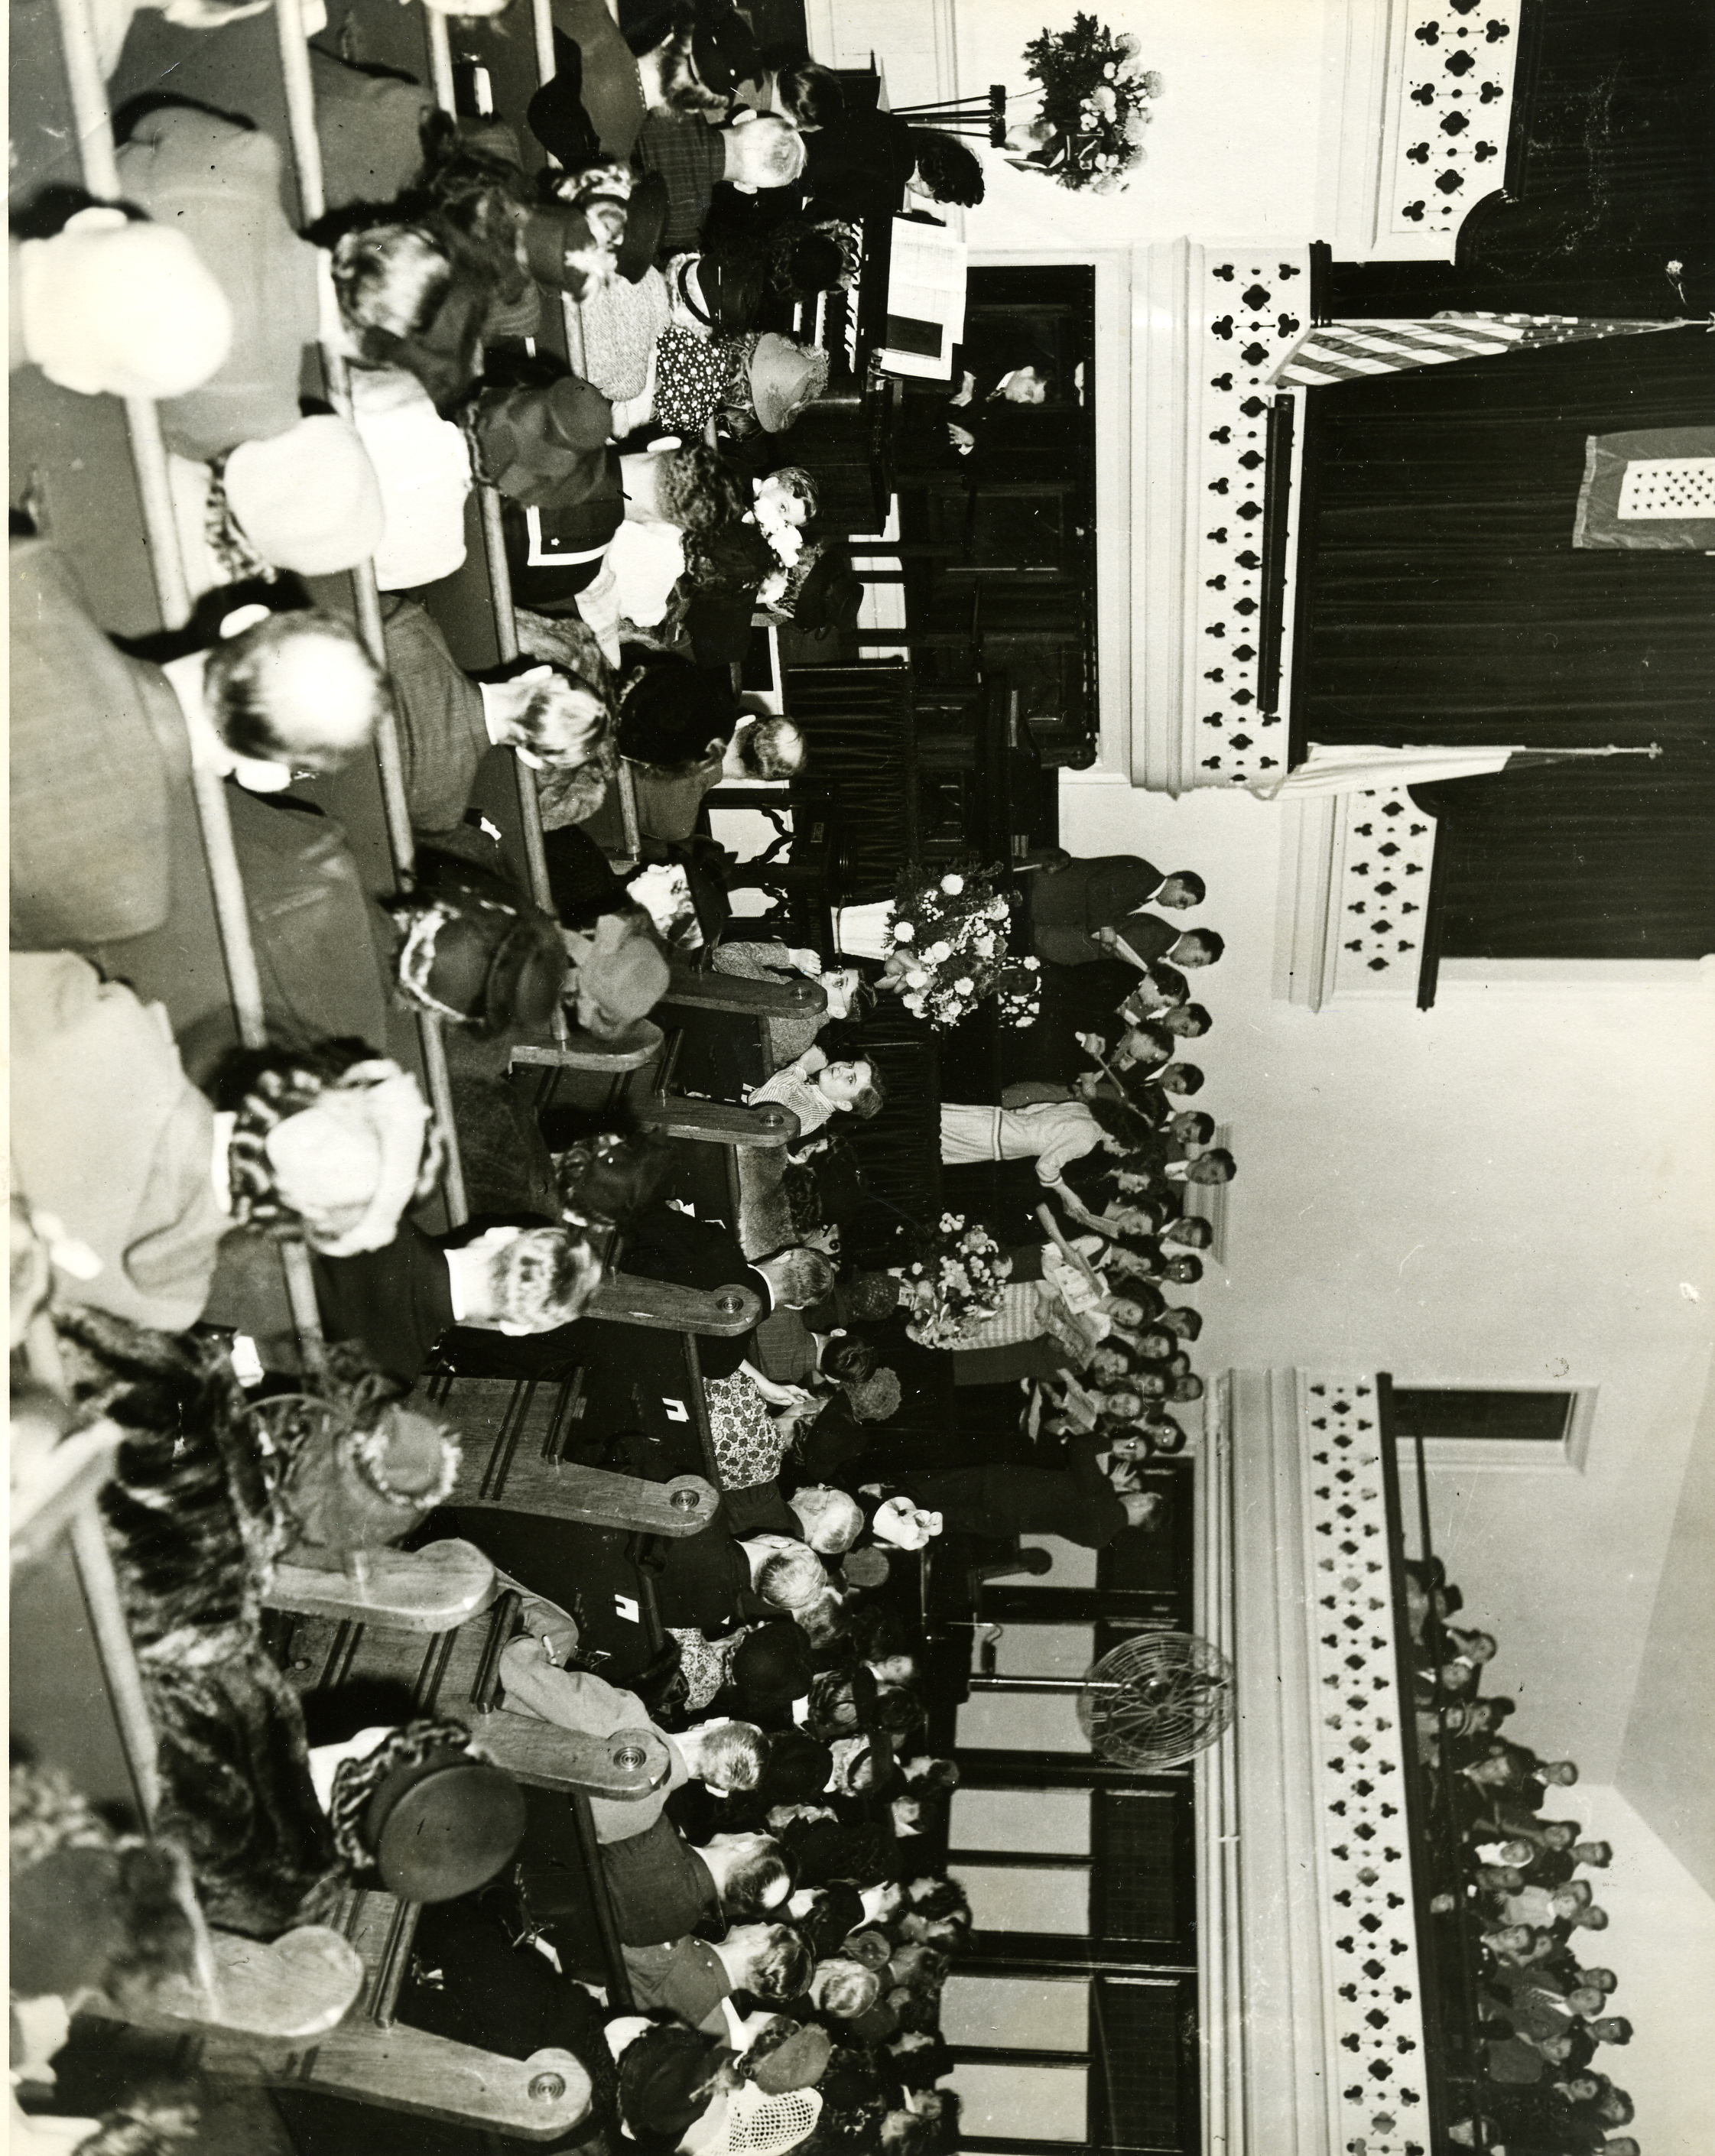 A black and white photo of a crowded church. People are seated in pews, and a choir is standing and singing on stage.